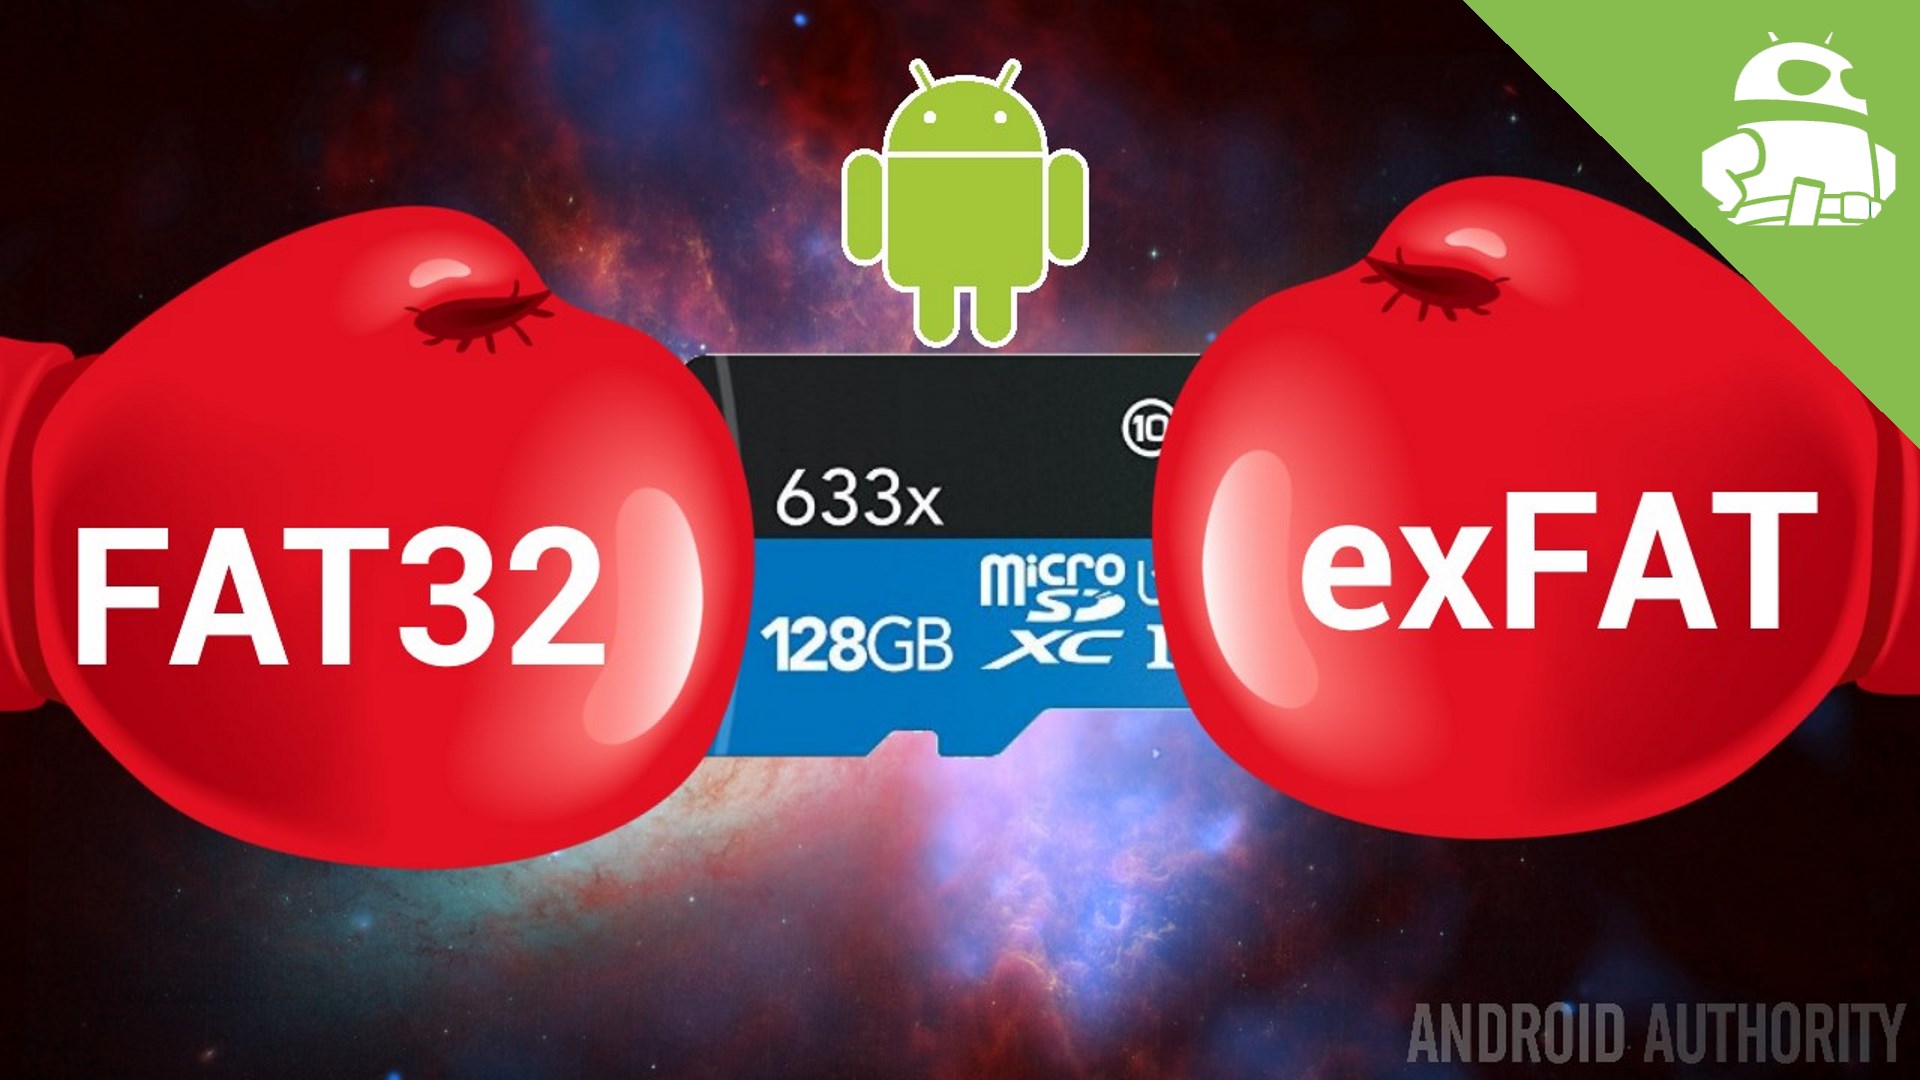 High Capacity Microsd Cards And Android Gary Explains